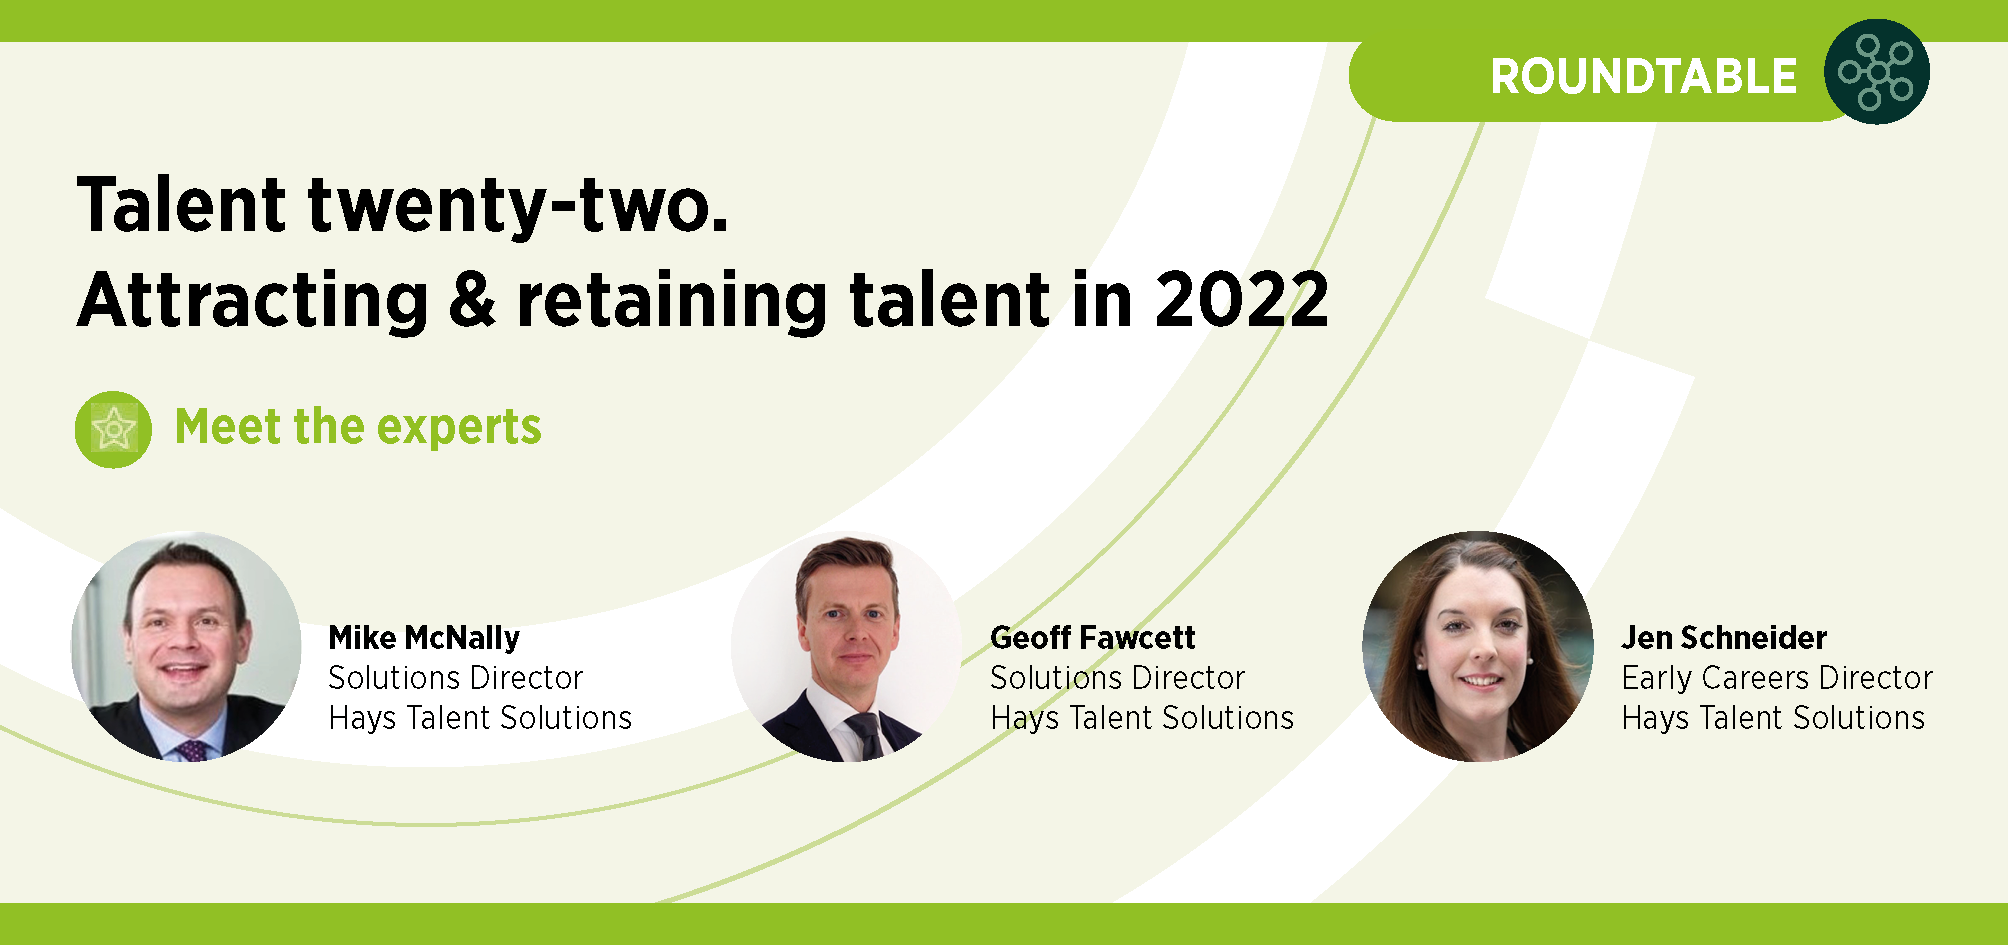 Talent twenty-two: Attracting and retaining talent in 2022